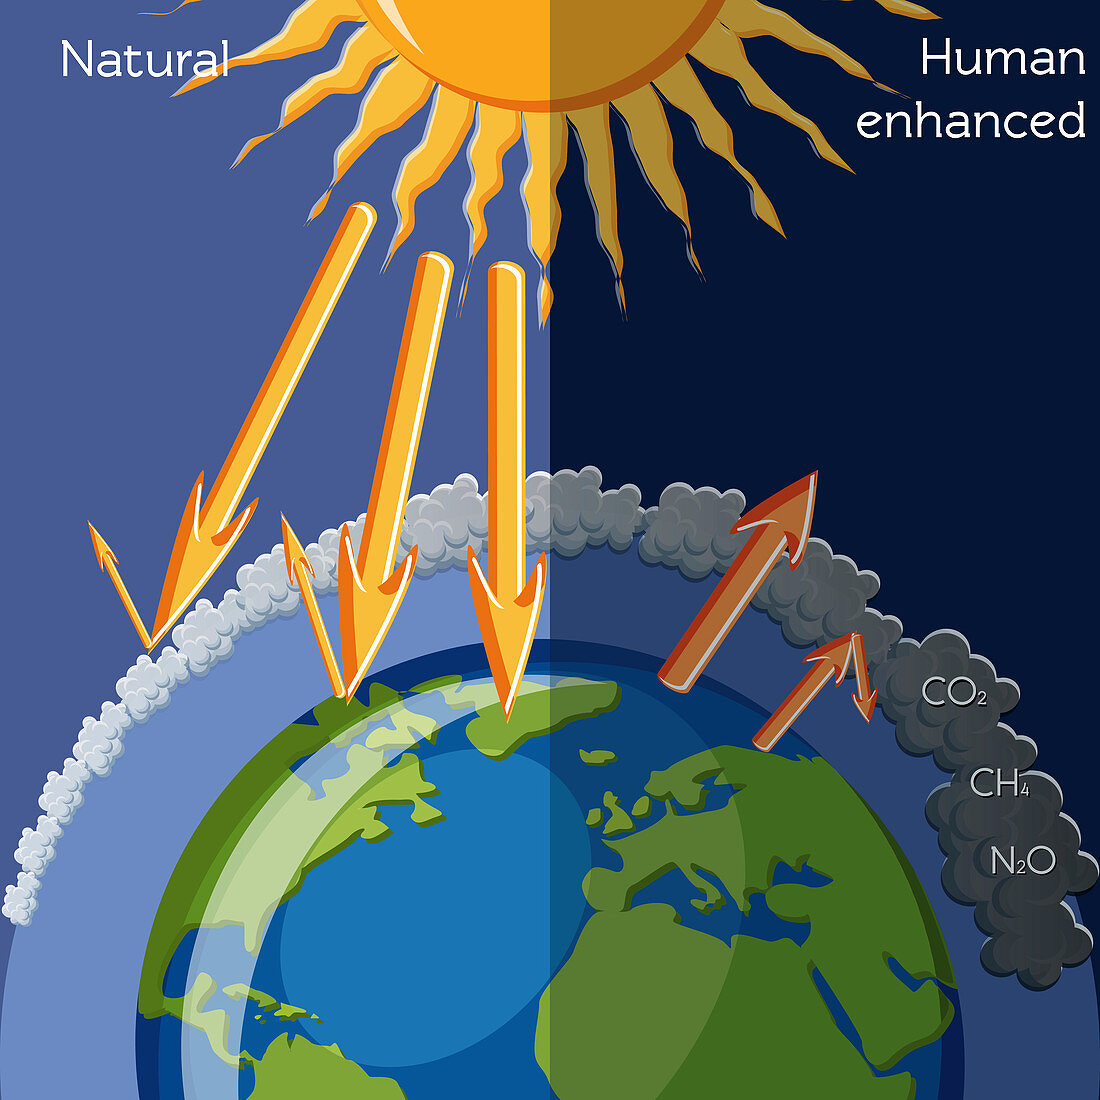 Natural and human enhanced greenhouse effect, illustration